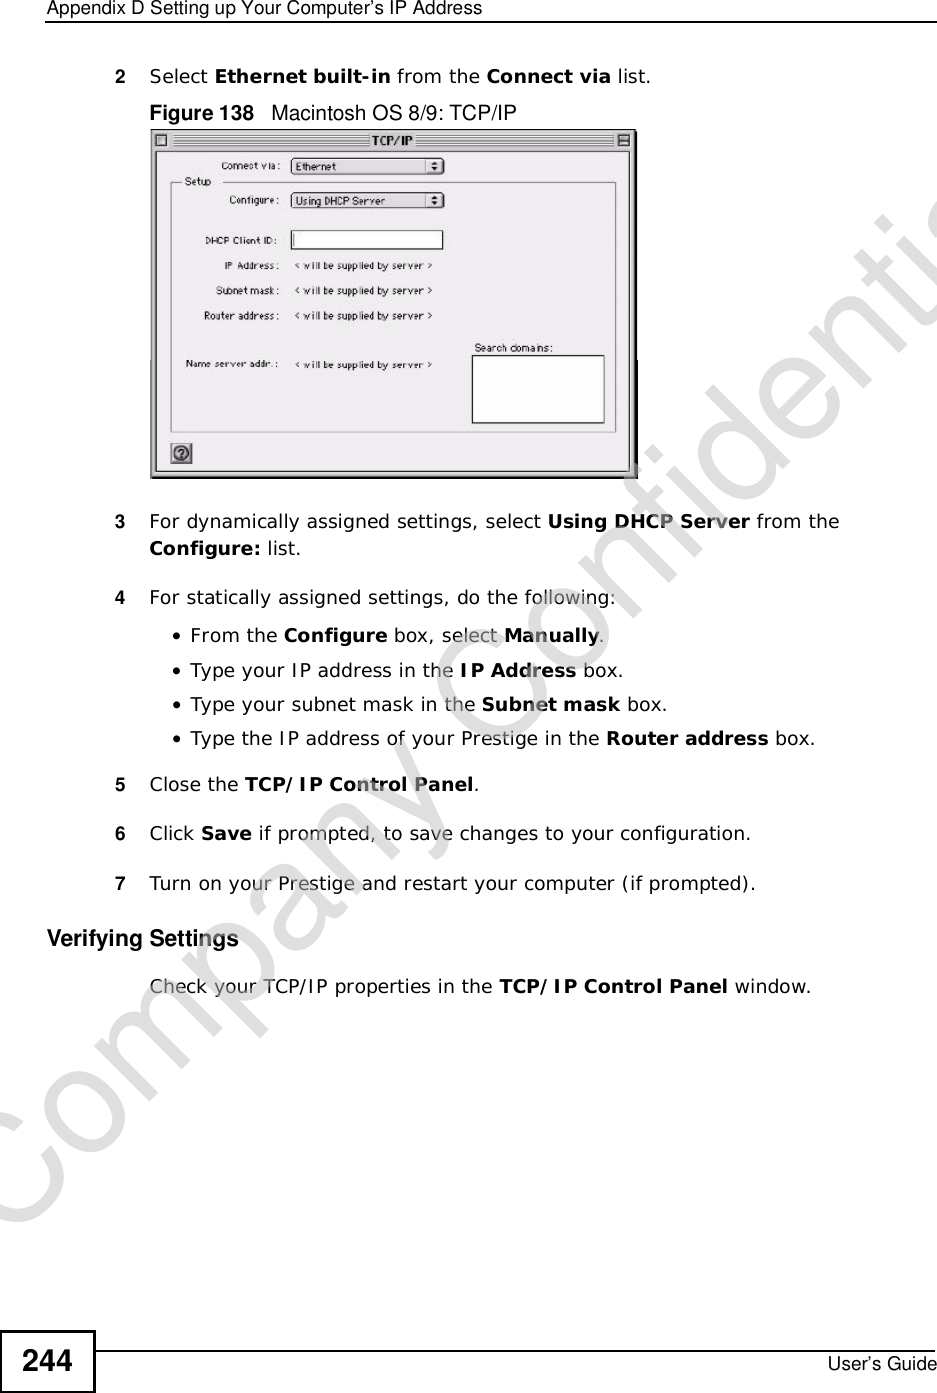 Appendix DSetting up Your Computer’s IP AddressUser’s Guide2442Select Ethernet built-in from the Connect via list.Figure 138   Macintosh OS 8/9: TCP/IP3For dynamically assigned settings, select Using DHCP Server from the Configure: list.4For statically assigned settings, do the following:•From the Configure box, select Manually.•Type your IP address in the IP Address box.•Type your subnet mask in the Subnet mask box.•Type the IP address of your Prestige in the Router address box.5Close the TCP/IP Control Panel.6Click Save if prompted, to save changes to your configuration.7Turn on your Prestige and restart your computer (if prompted).Verifying SettingsCheck your TCP/IP properties in the TCP/IP Control Panel window.Company Confidential